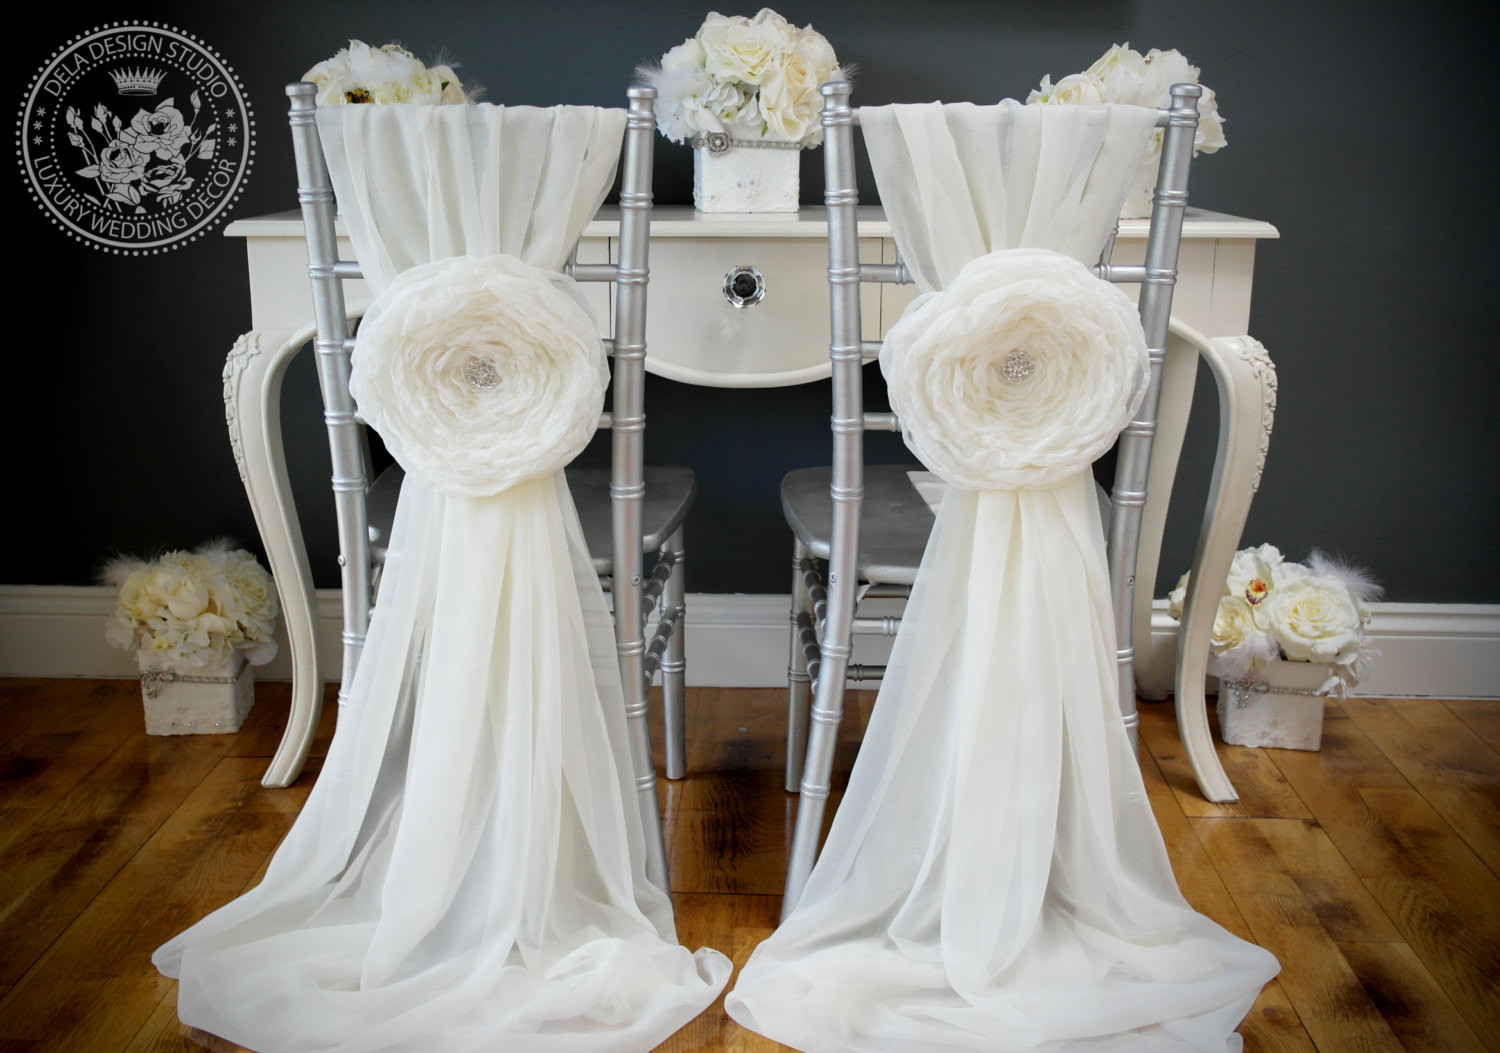 DIY Chair Covers Wedding
 Vintage Glam White Chiffon Chair Covers for Reception…DIY